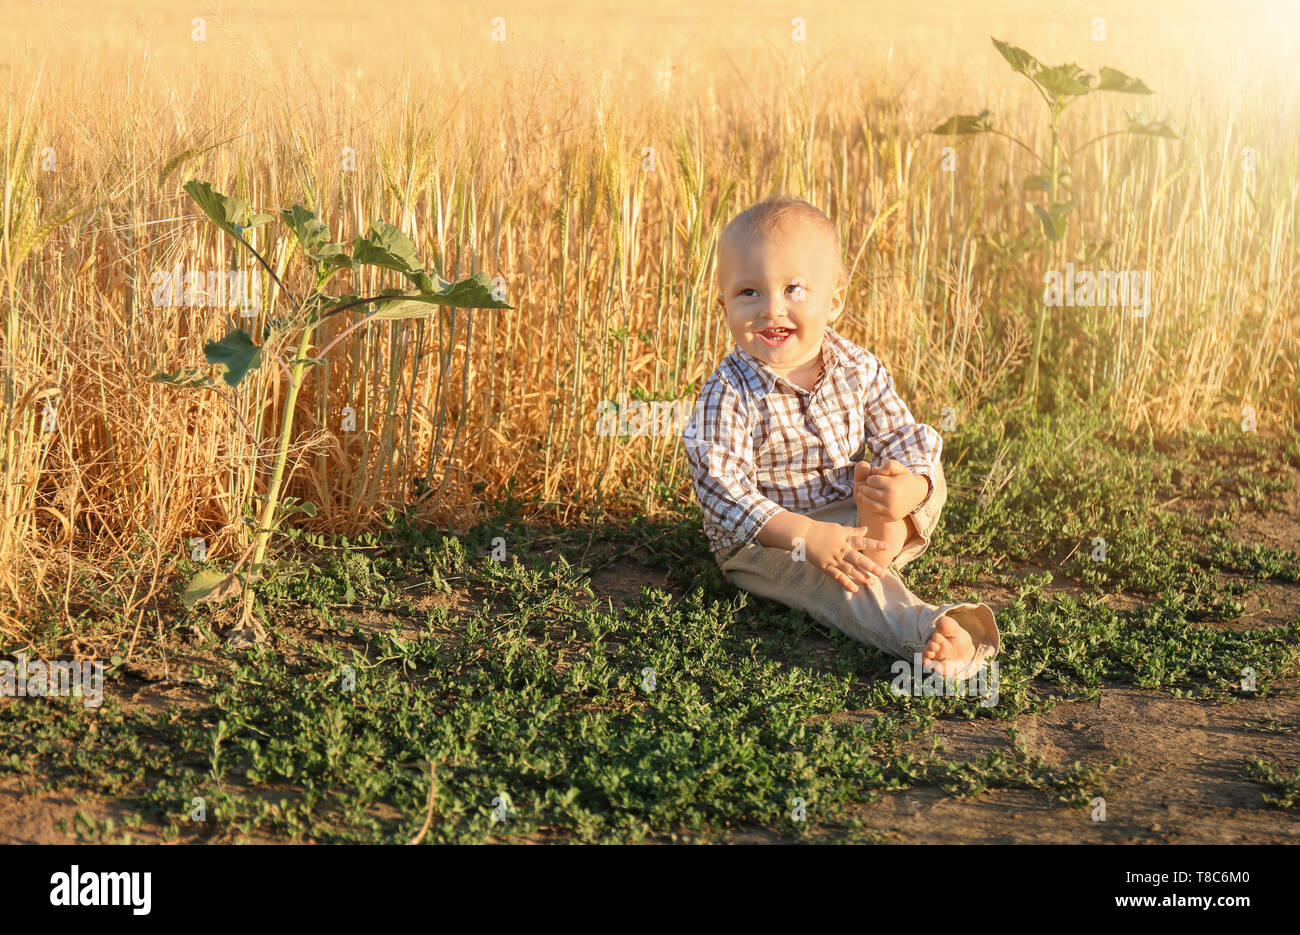 Baby Boy Joyful Laughing & Playing in Country Meadow Stock Image